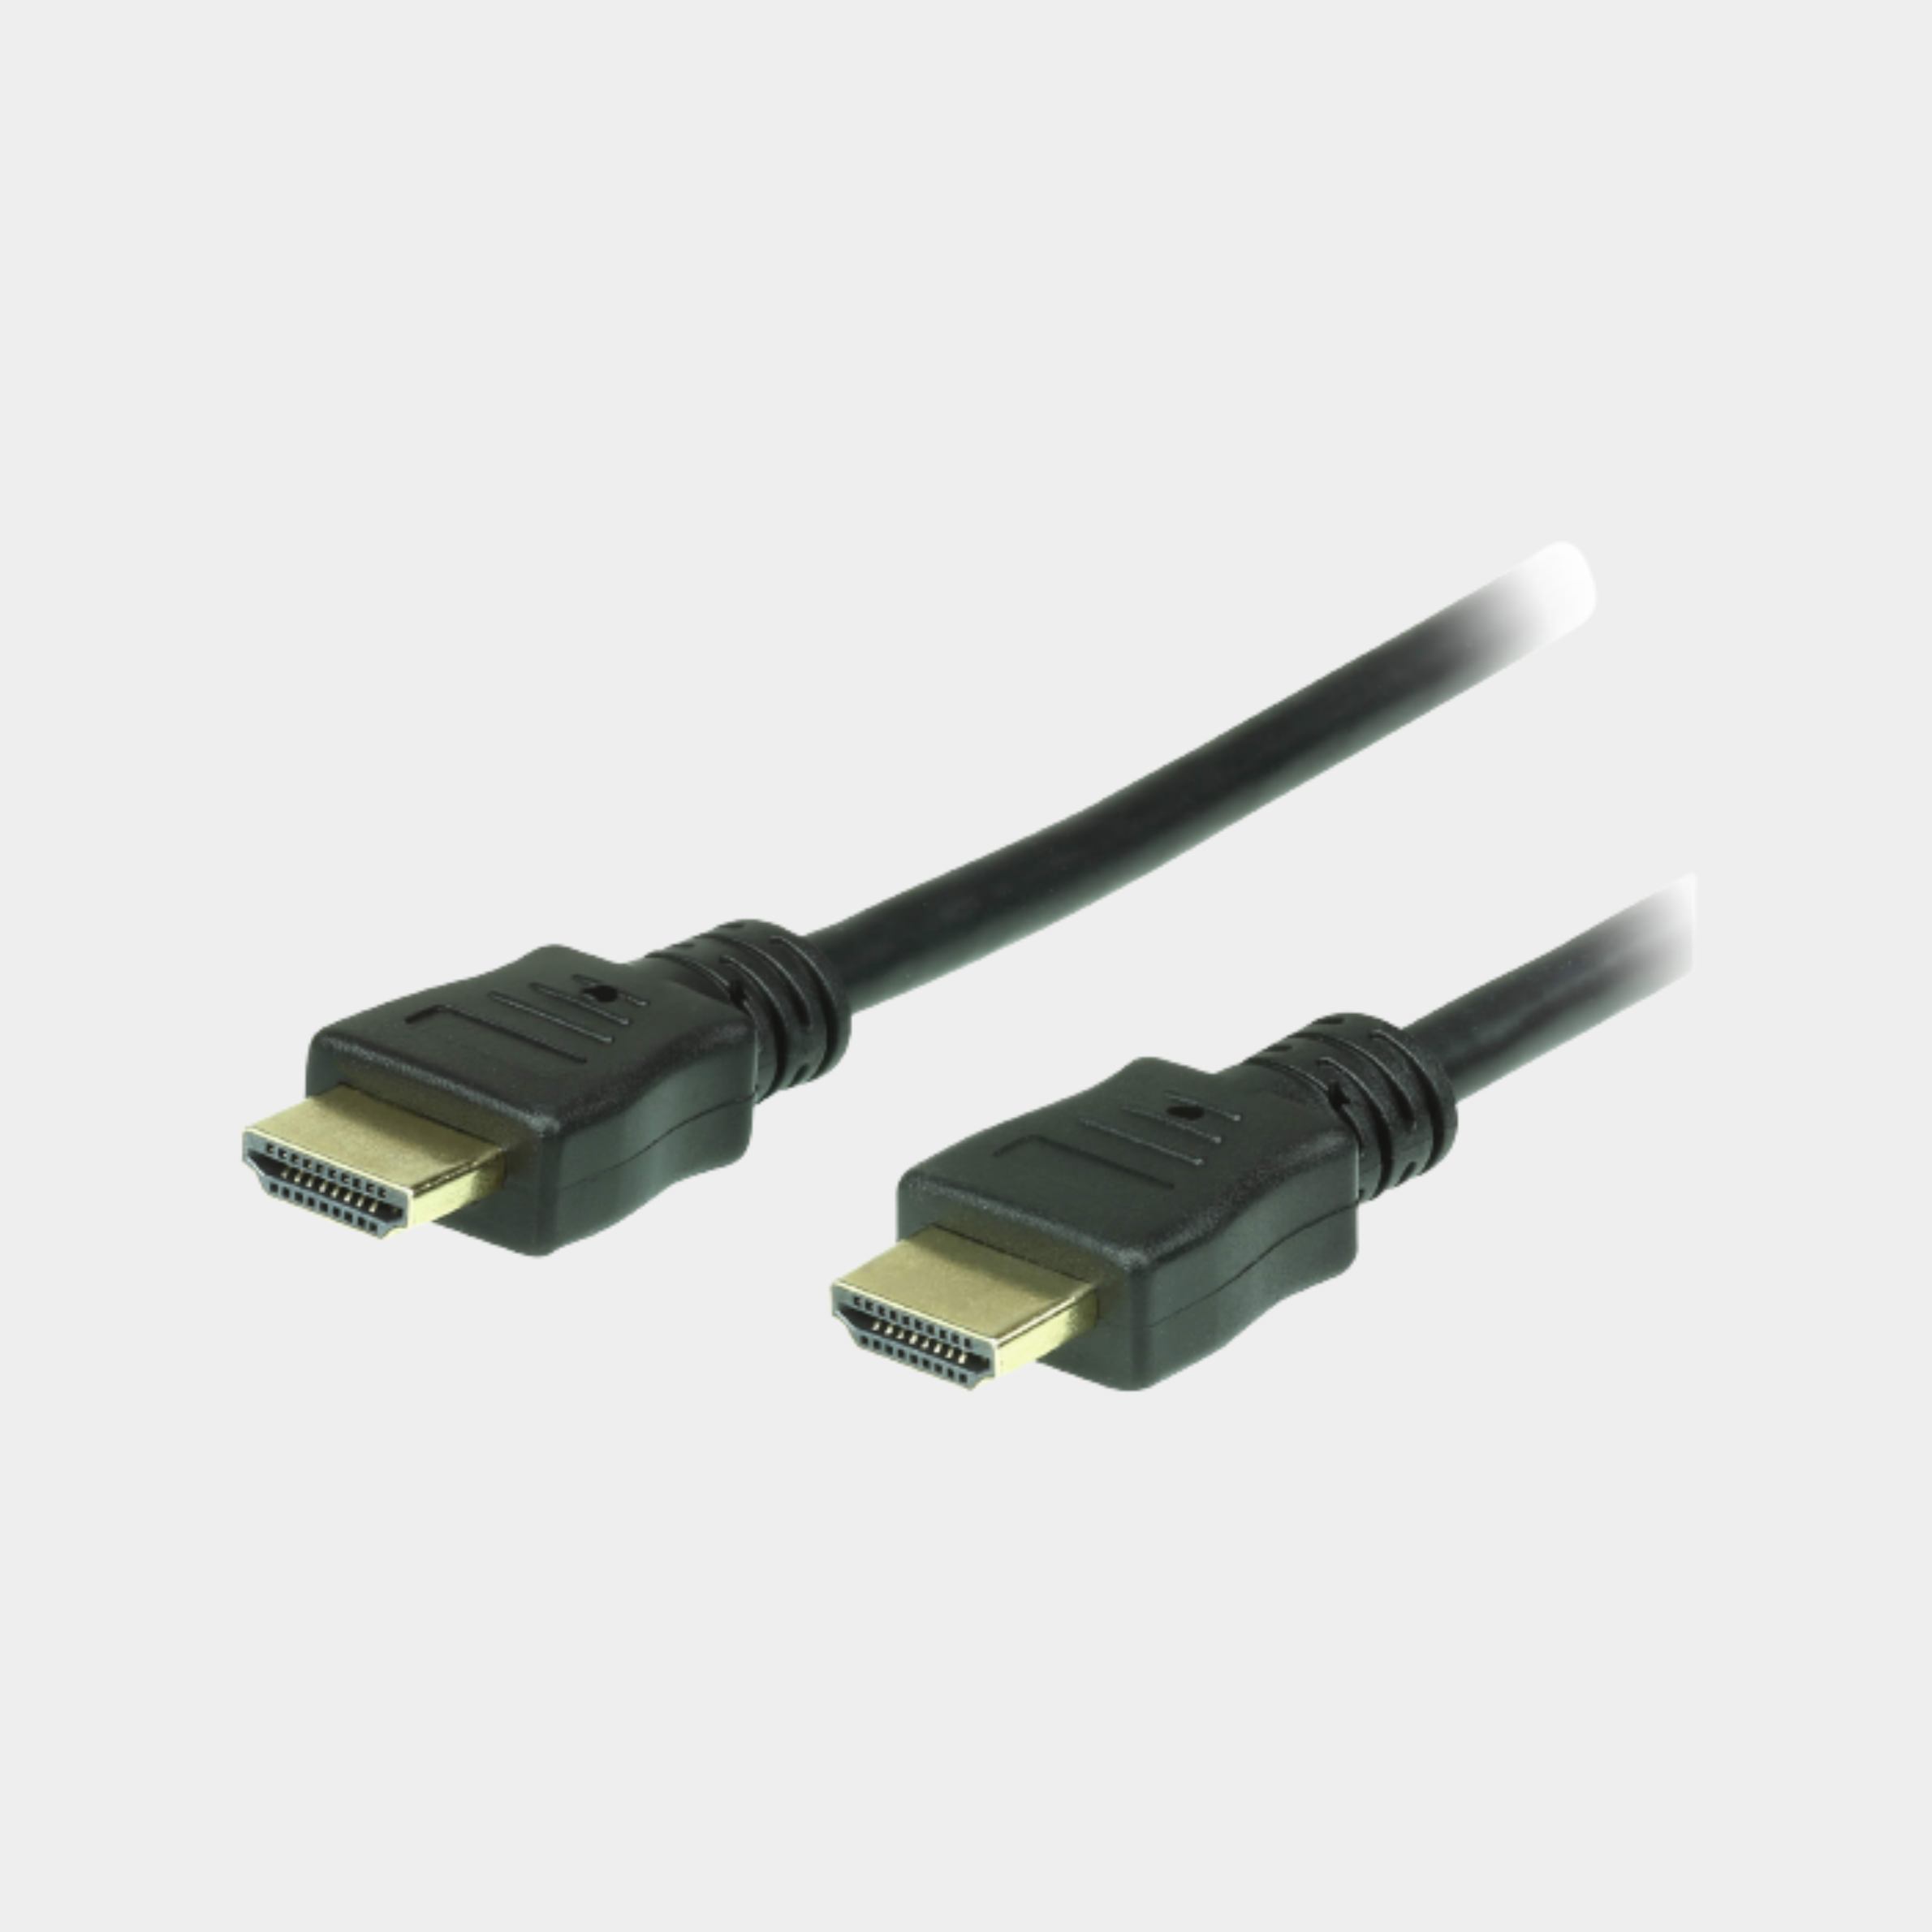 Aten 10 m High Speed HDMI Cable with Ethernet  2L-7D10H(ATEN 2L-7D10H)